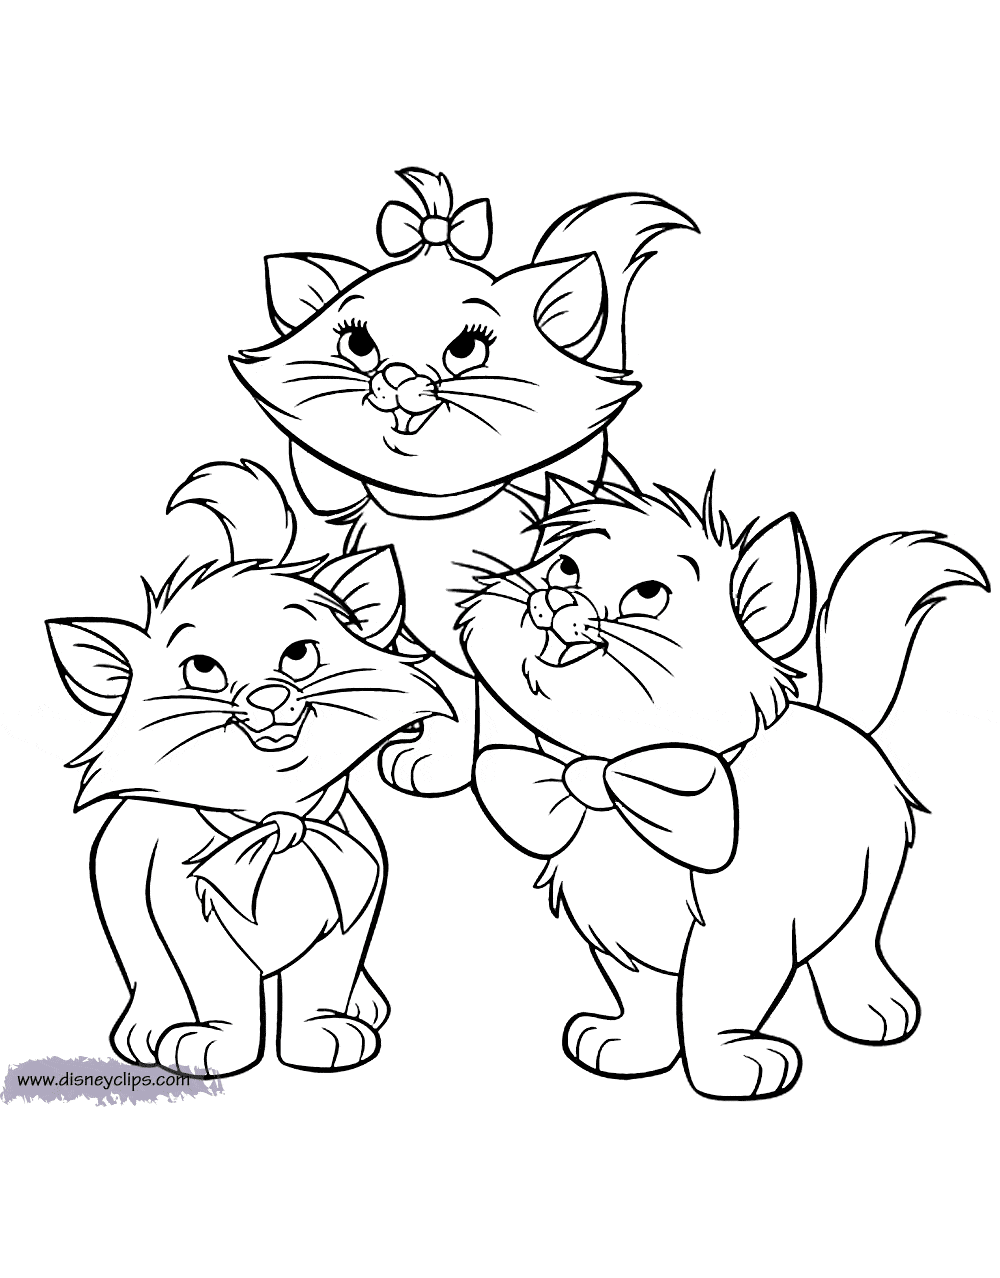 The Aristocats Coloring Pages   Disneyclips.com